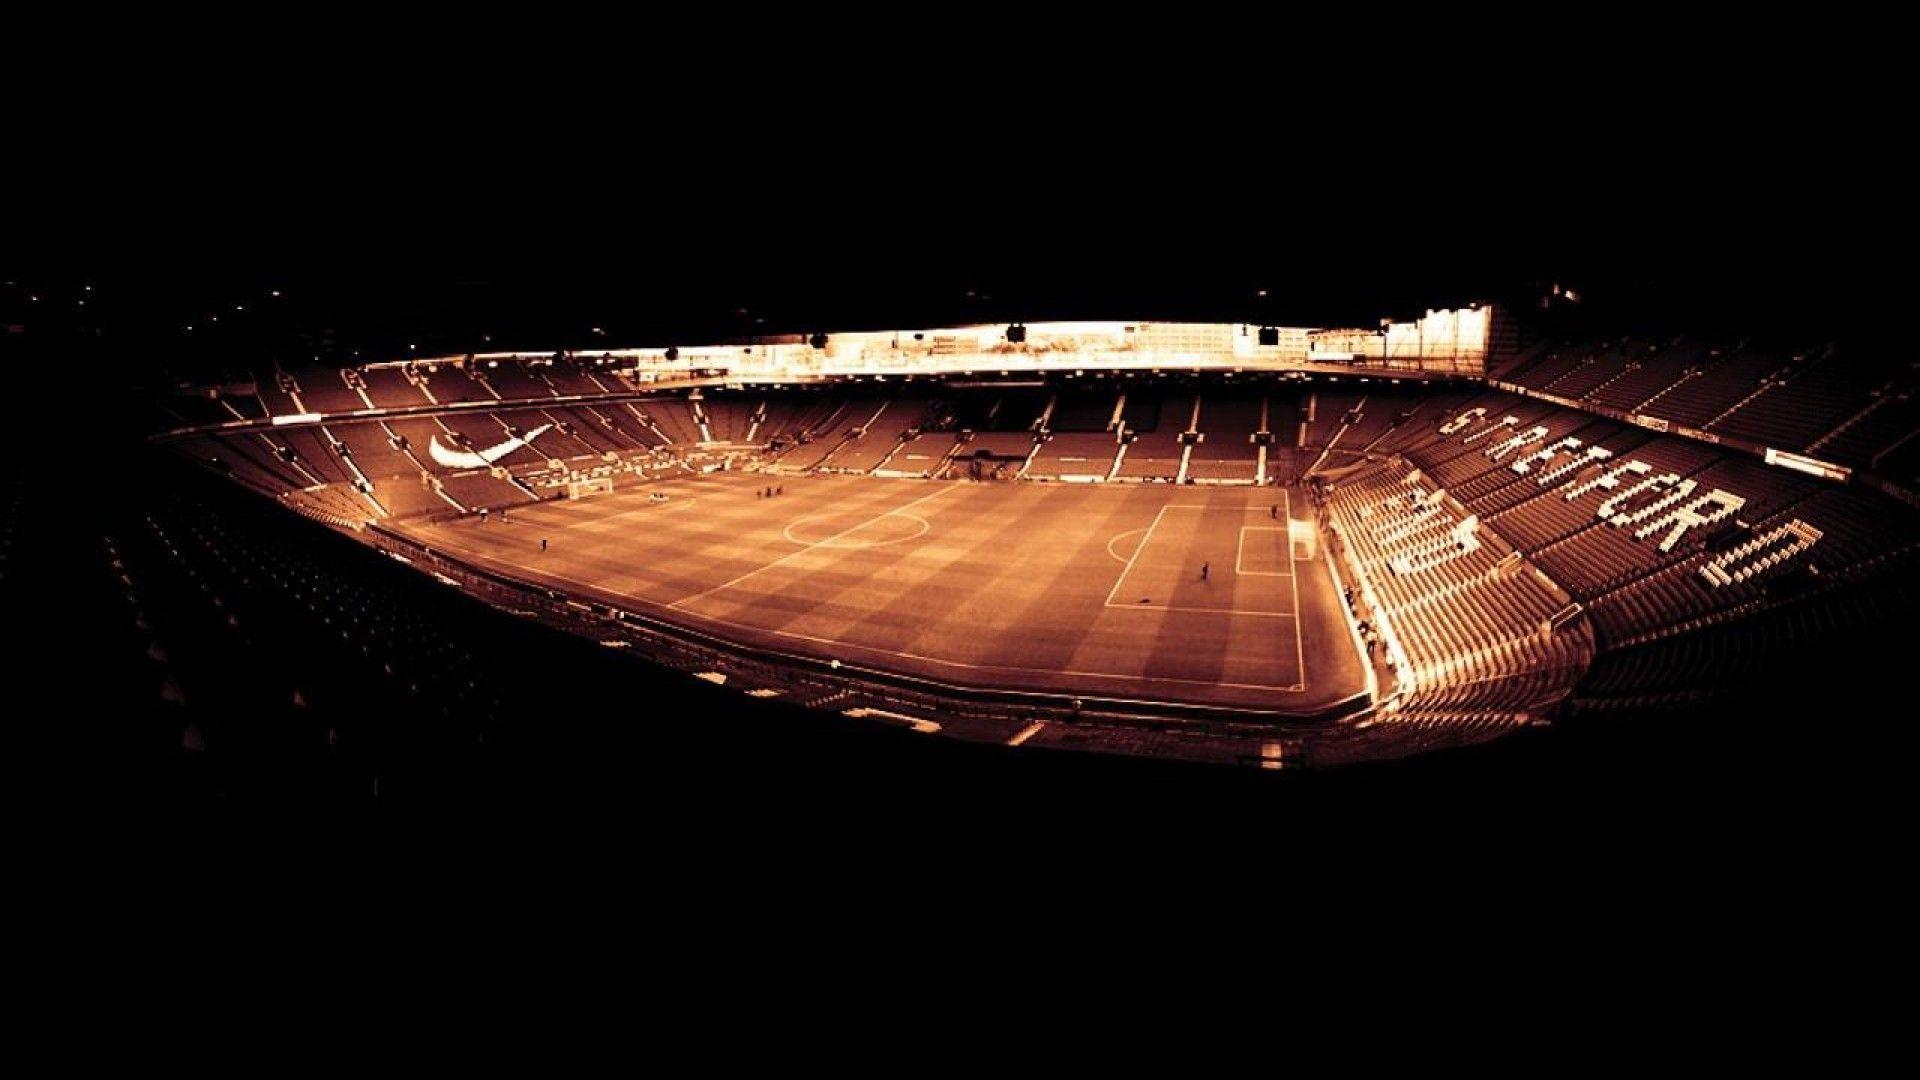 ScreenHeaven: Football Pitch Manchester United FC Old Trafford